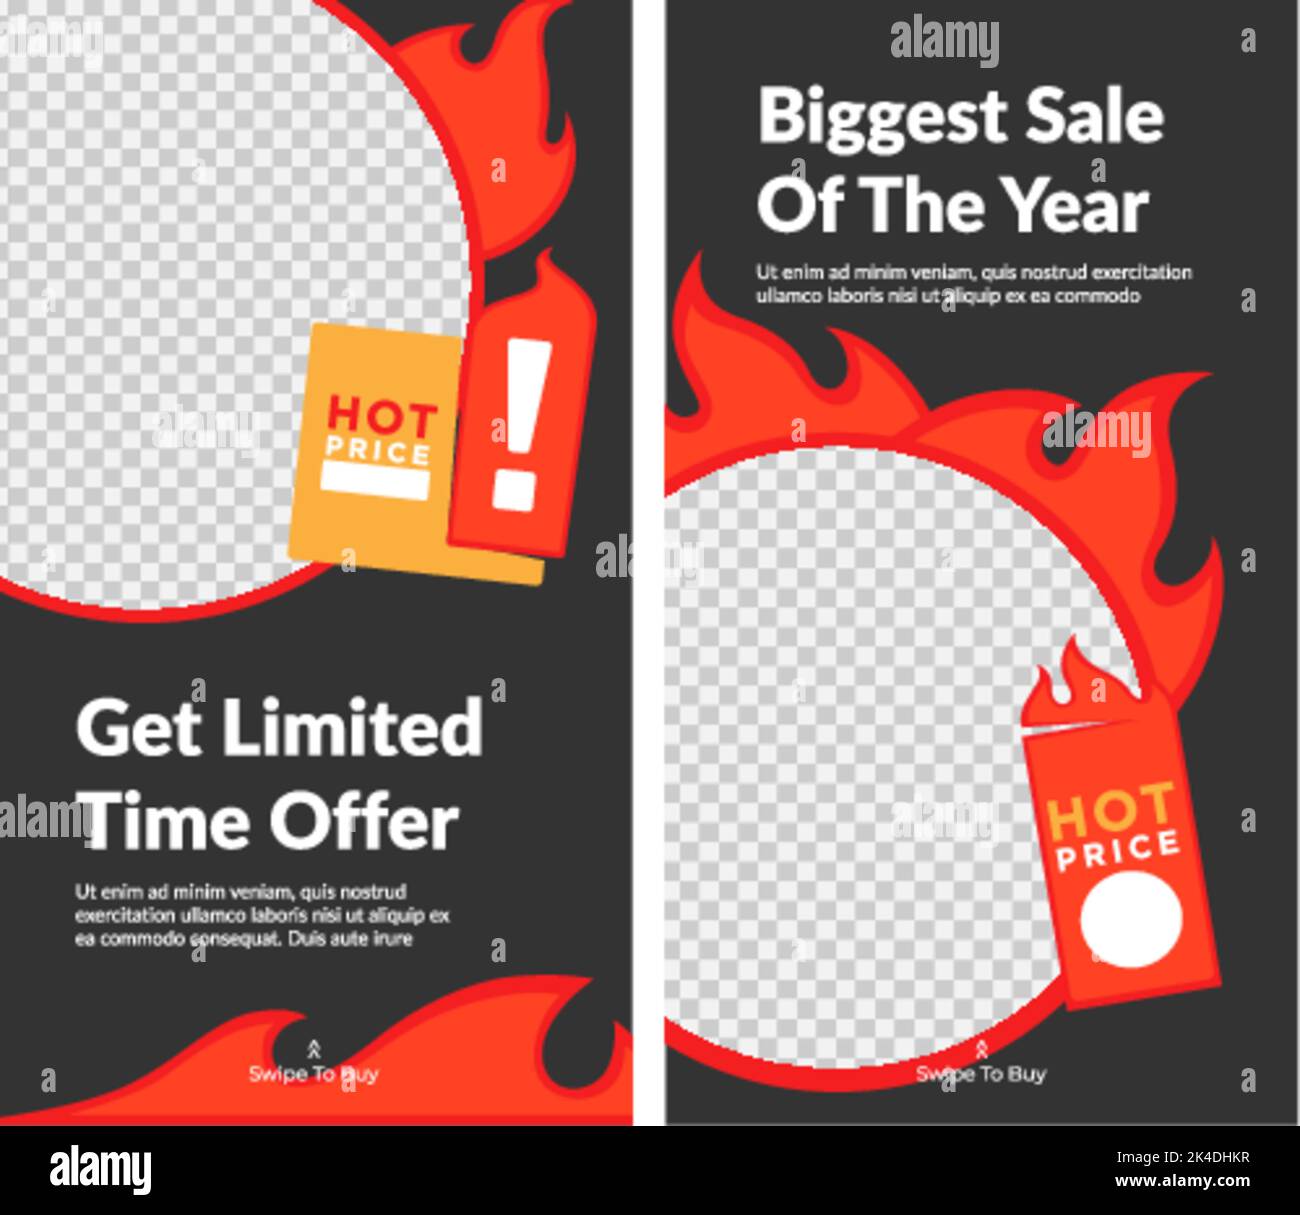 Biggest sale of the year, get limited time offer Stock Vector